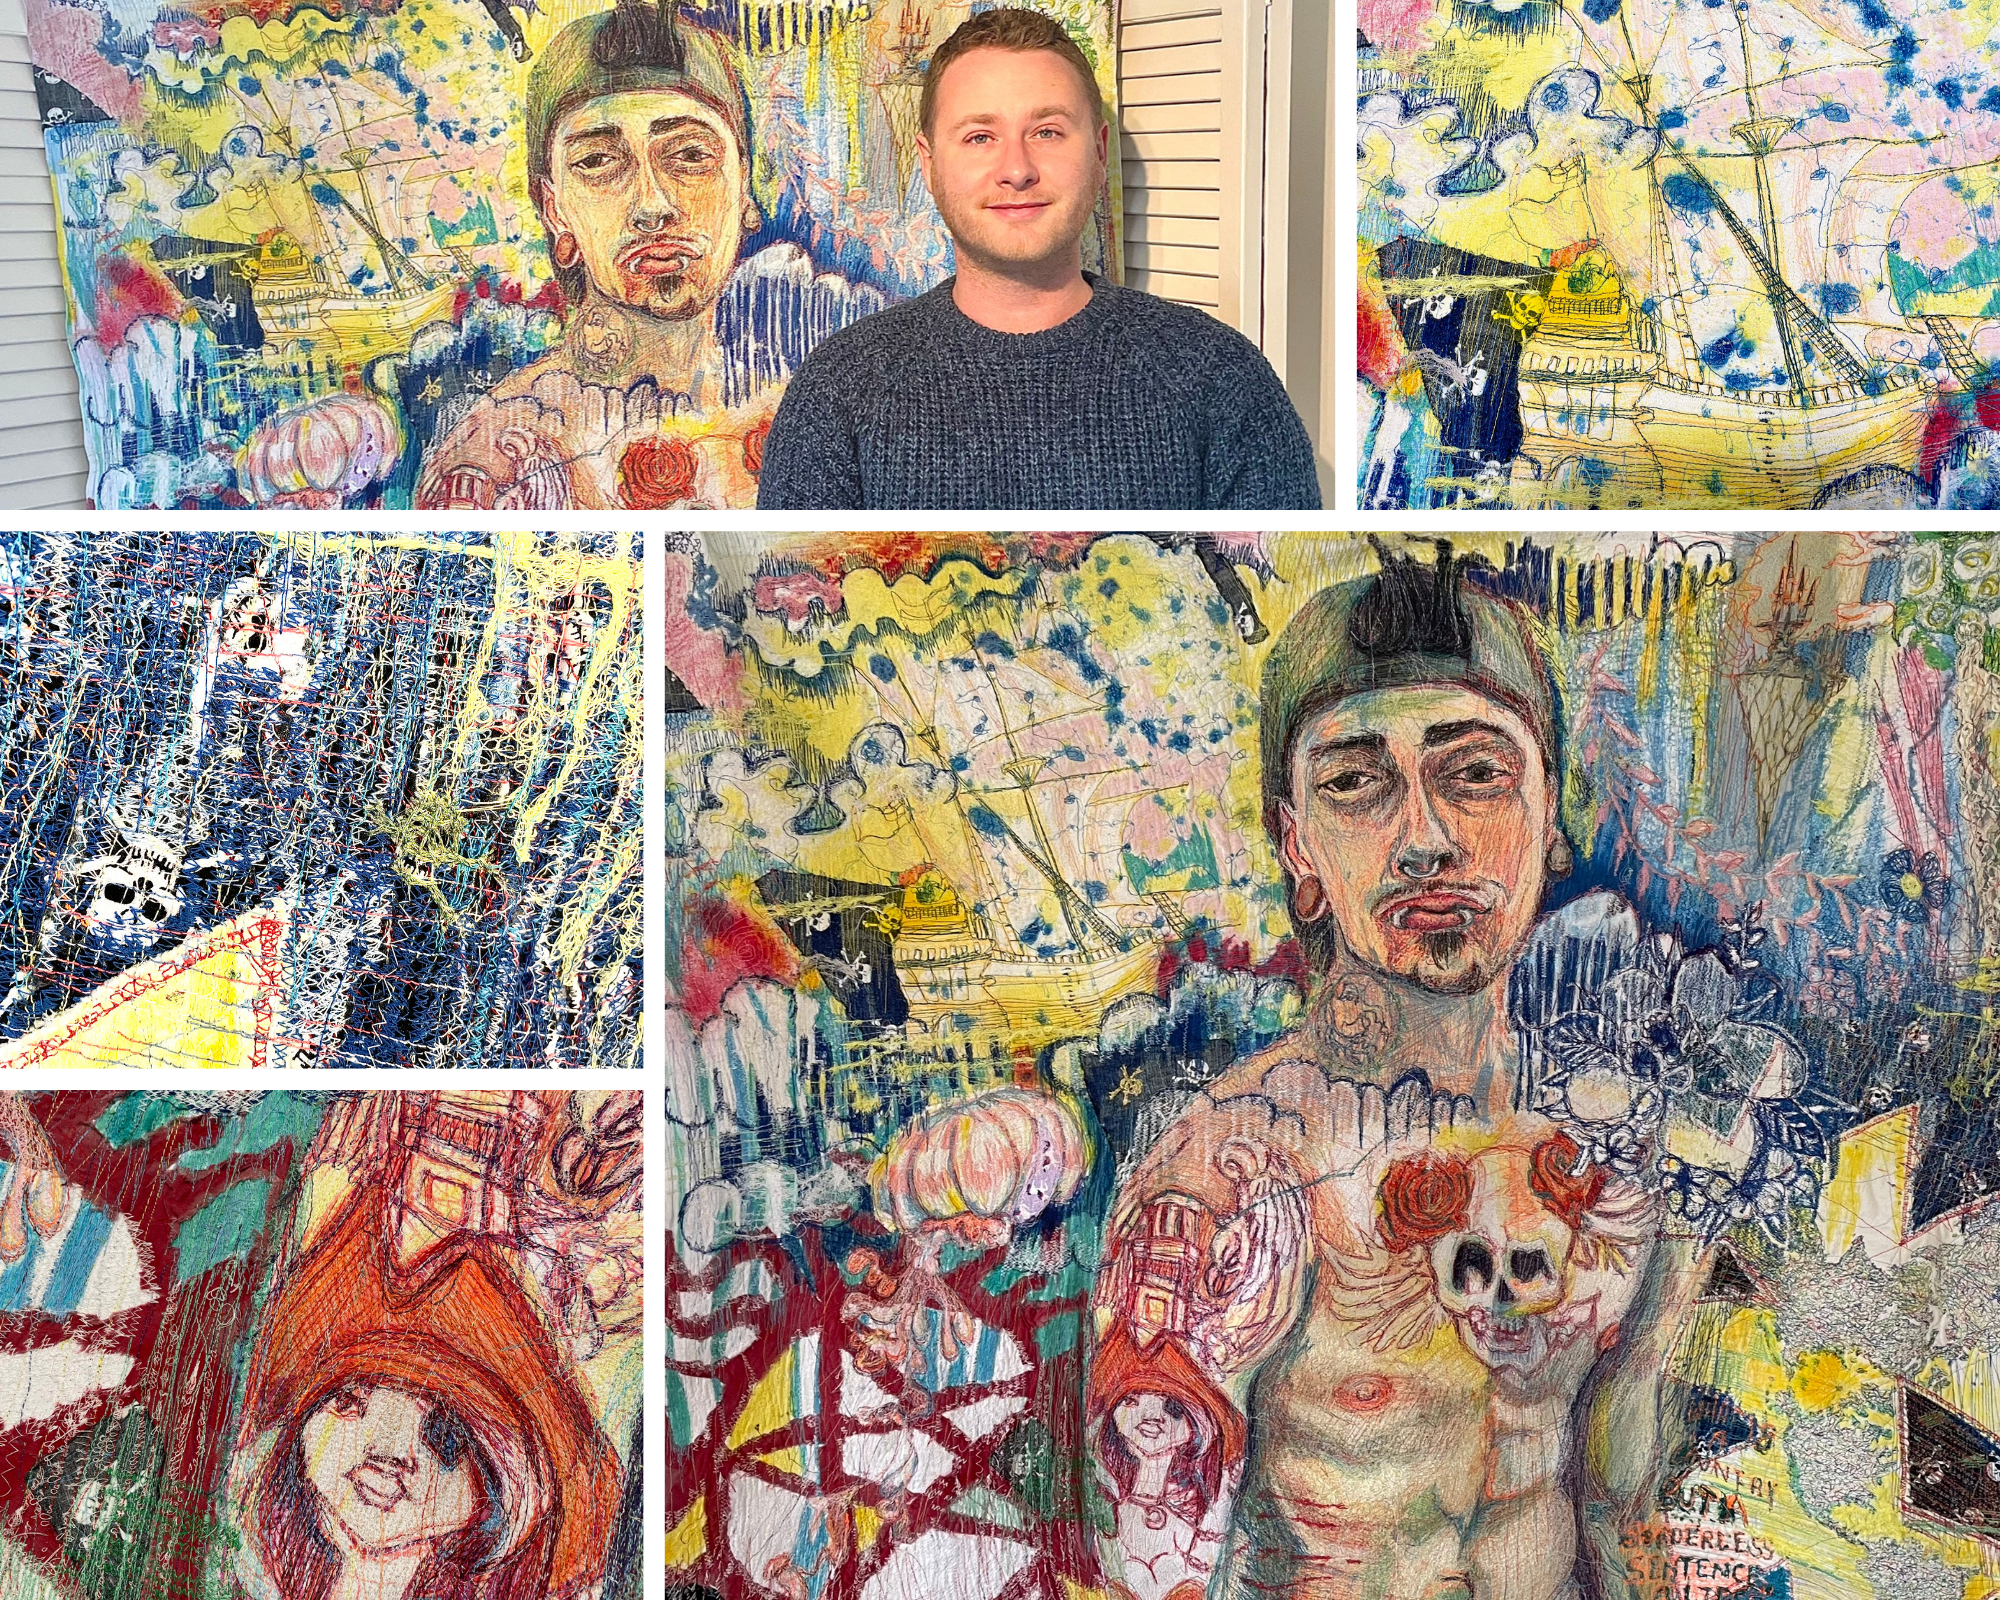 A textiles peice of art depecting a man in a snapback hat, on backwards, he is shirtlwess and surrounded by abstract artwork, some closeups are provided showing off his tattoo that looks like a priate with long red hair, a red hat and an eye patch. The artist is also depicted next to their work in a dark blue sweater.